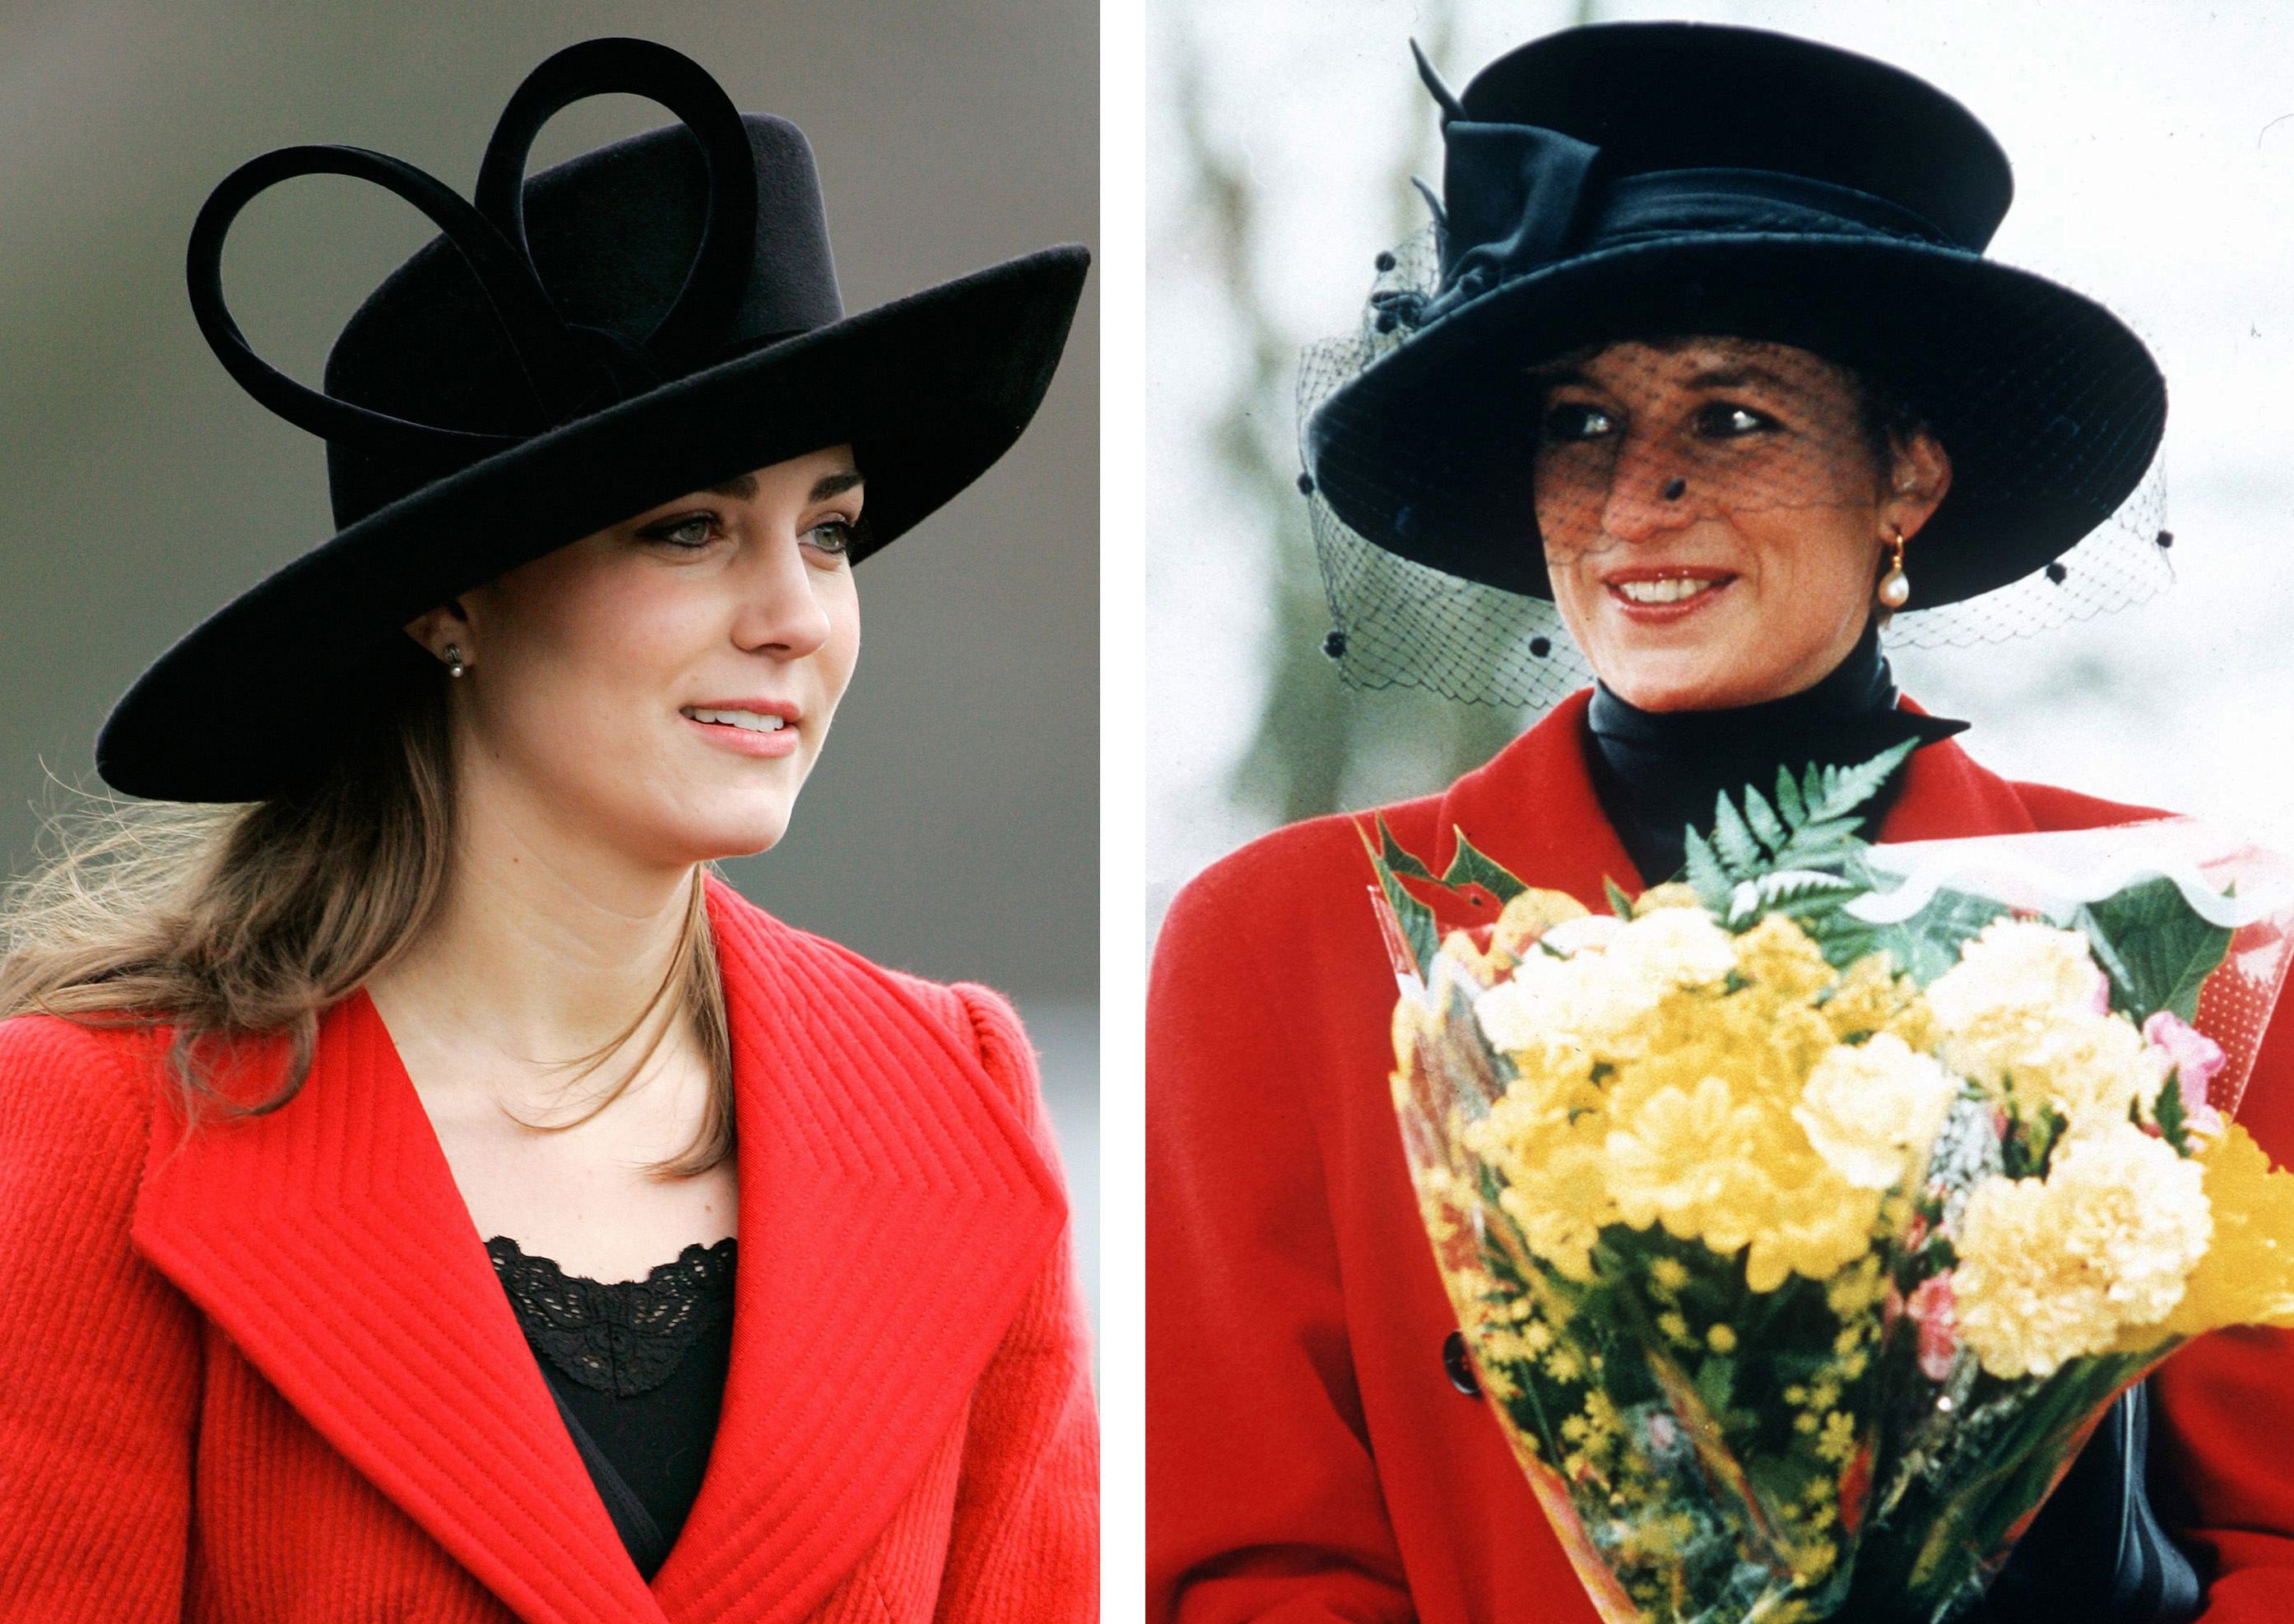 Left: Kate Middleton, Prince William's girlfriend, attends the Sovereign's Parade at Sandhurst Military Academy to watch the passing-out parade on December 15, 2006 in Surrey, England. Right: Princess Diana At Sandringham On Christmas Day | Source: Getty Images